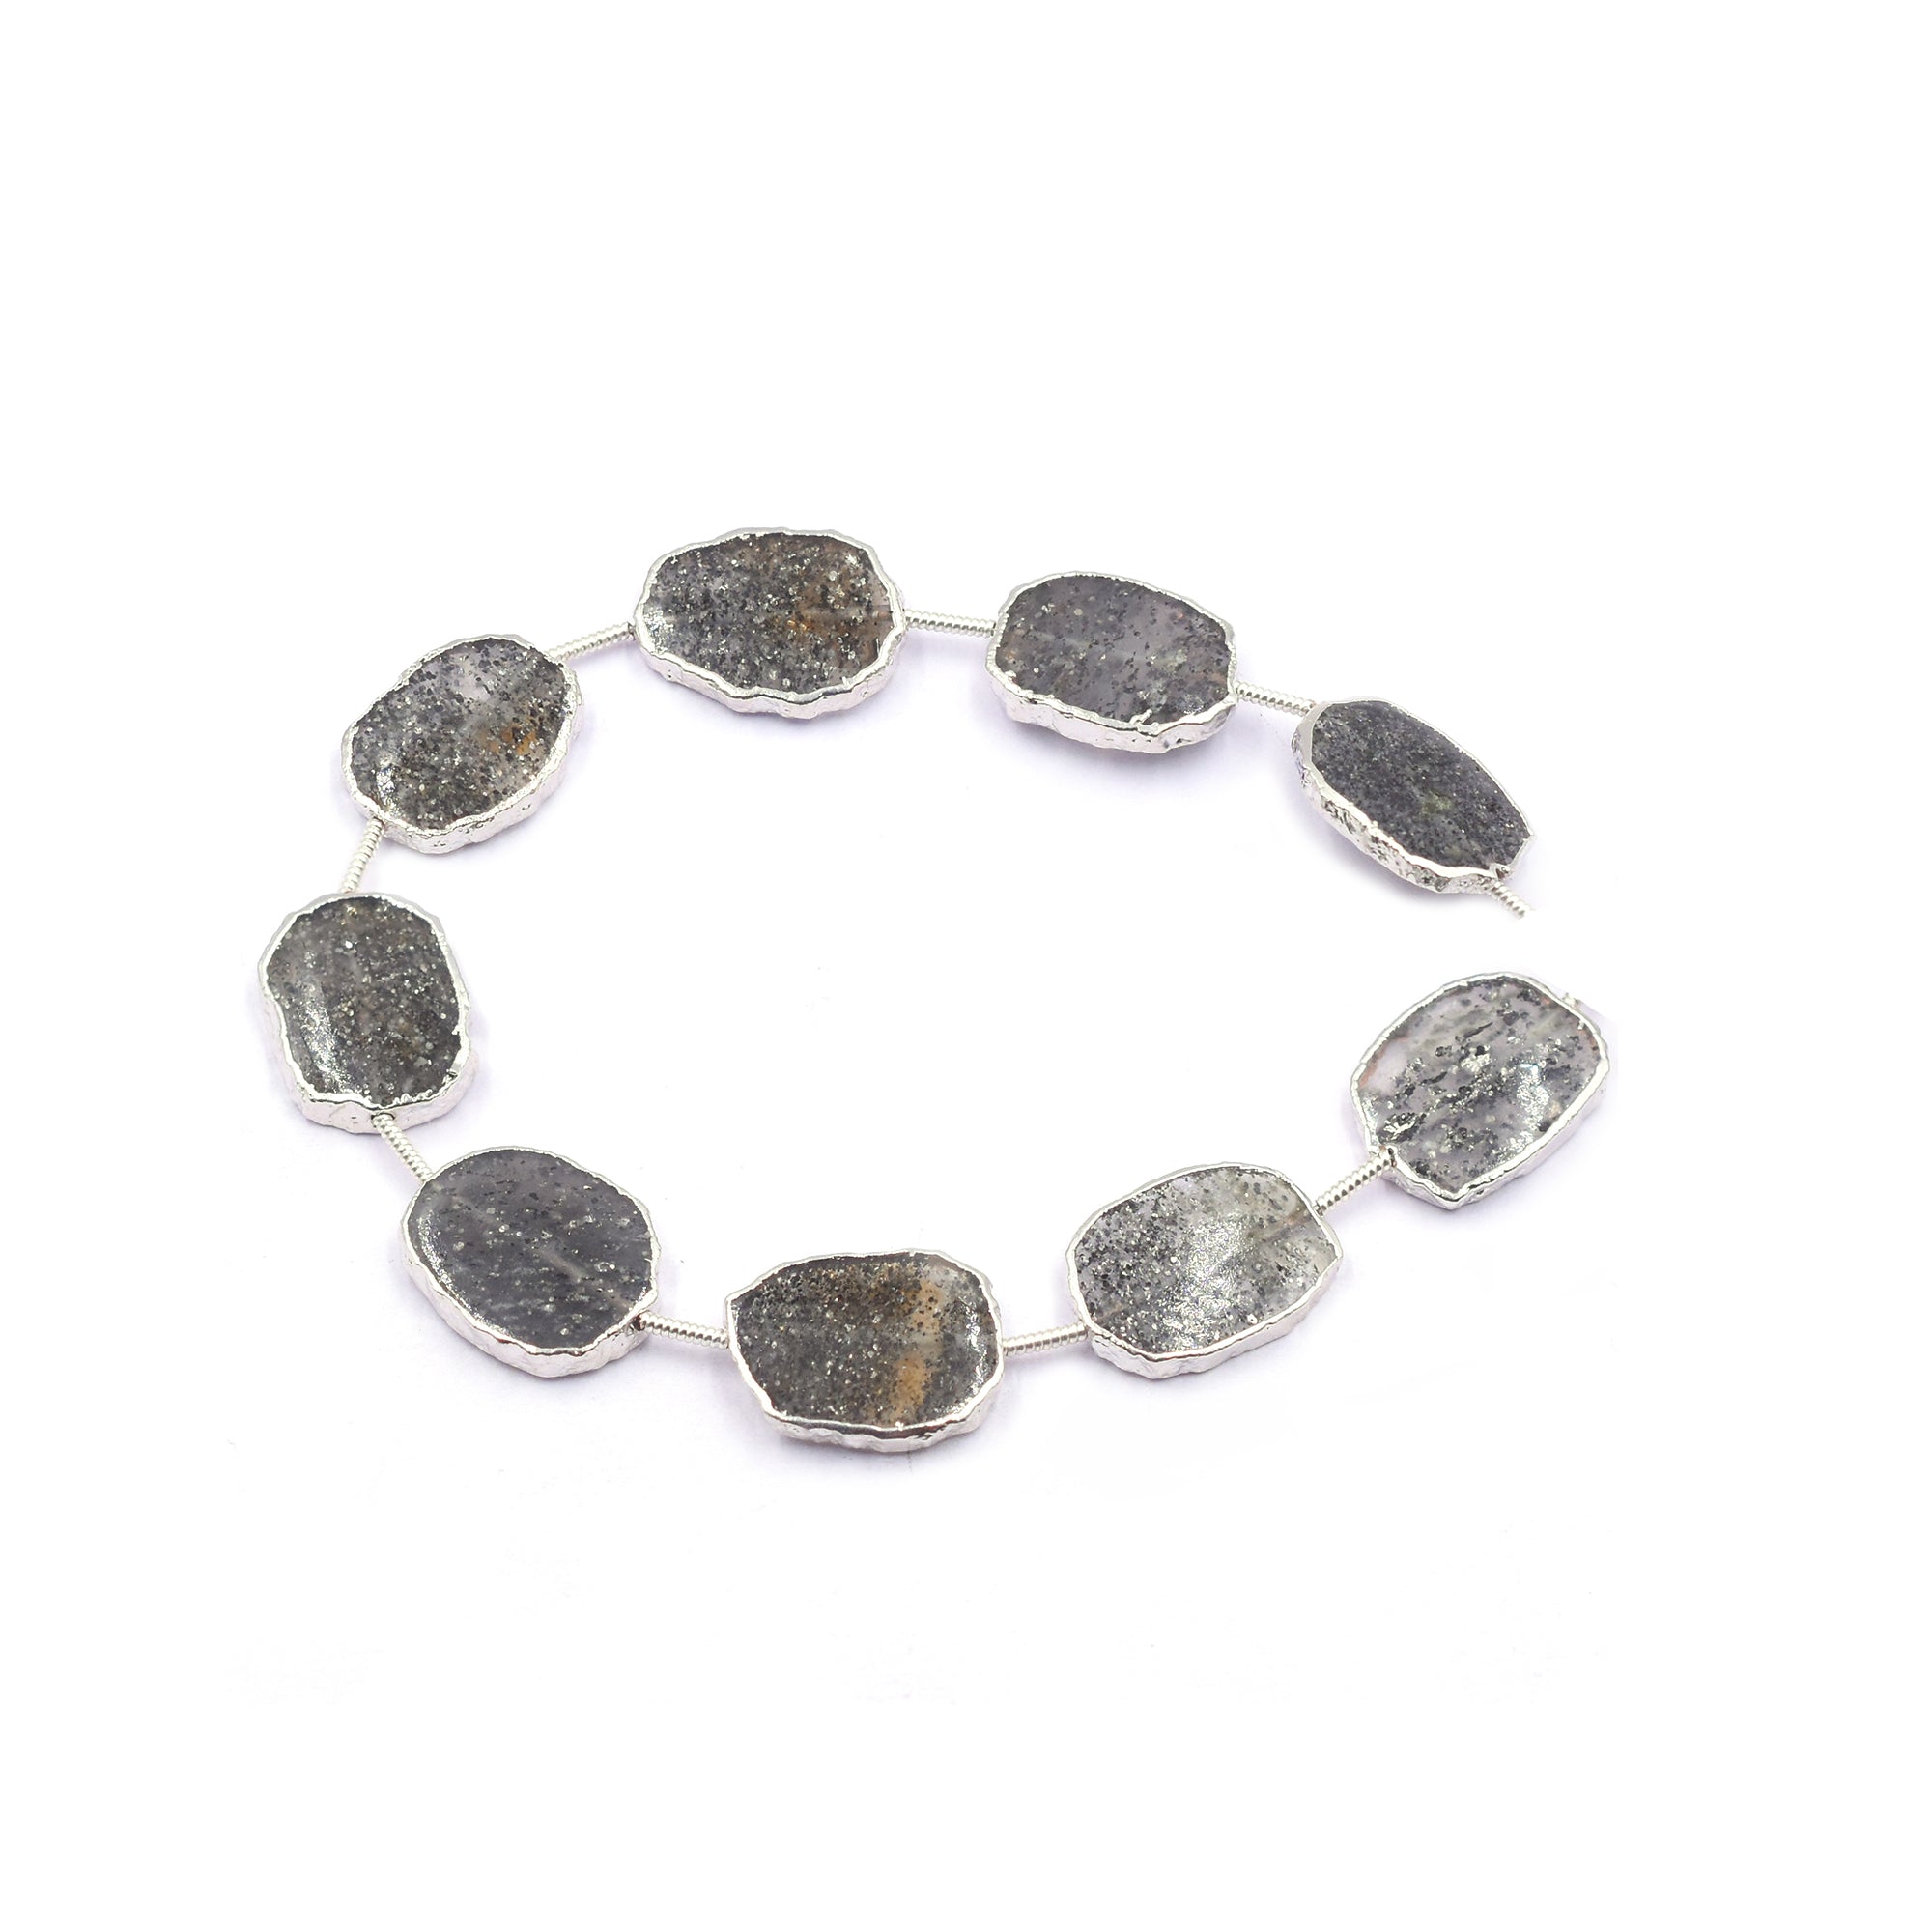 Black Sunstone 15X12 MM Uneven Shape Straight Drilled Rhodium Electroplated Strand